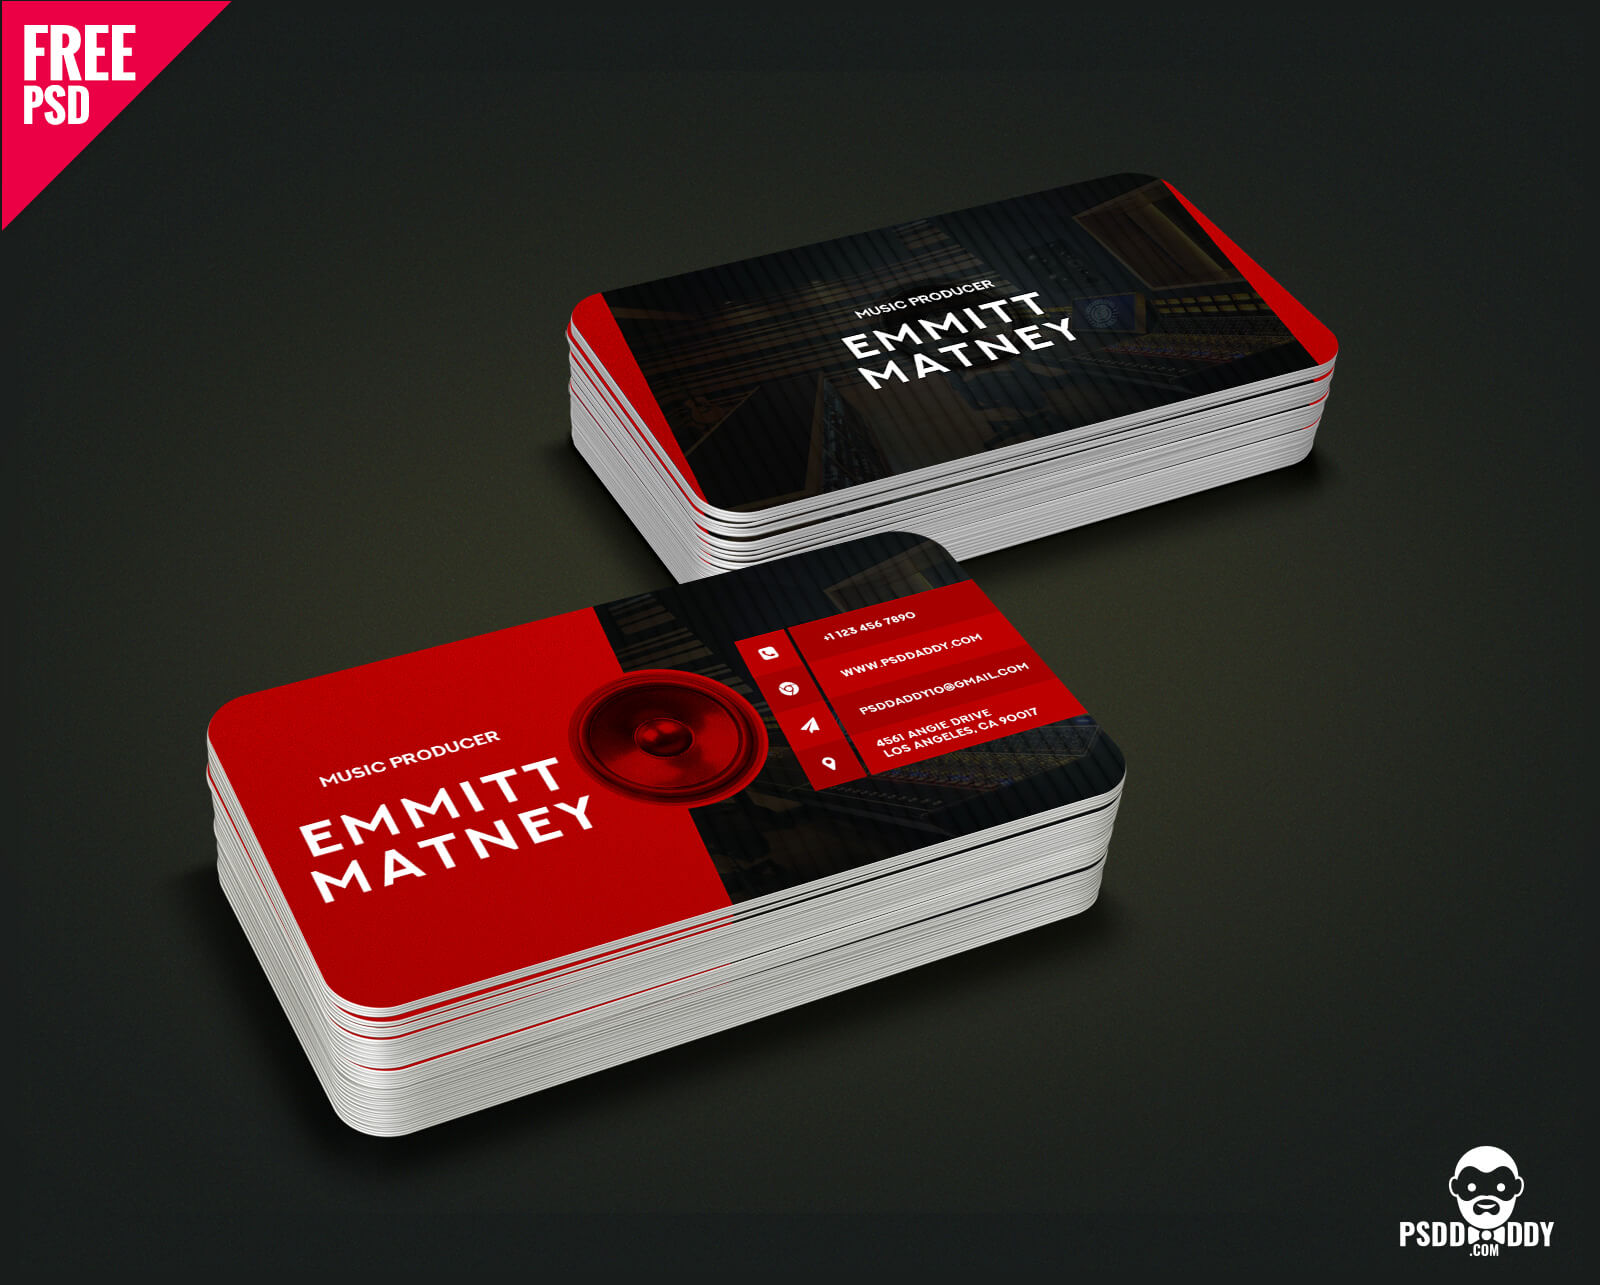 Download] Music Visiting Card Free Psd | Psddaddy Within Visiting Card Template Psd Free Download